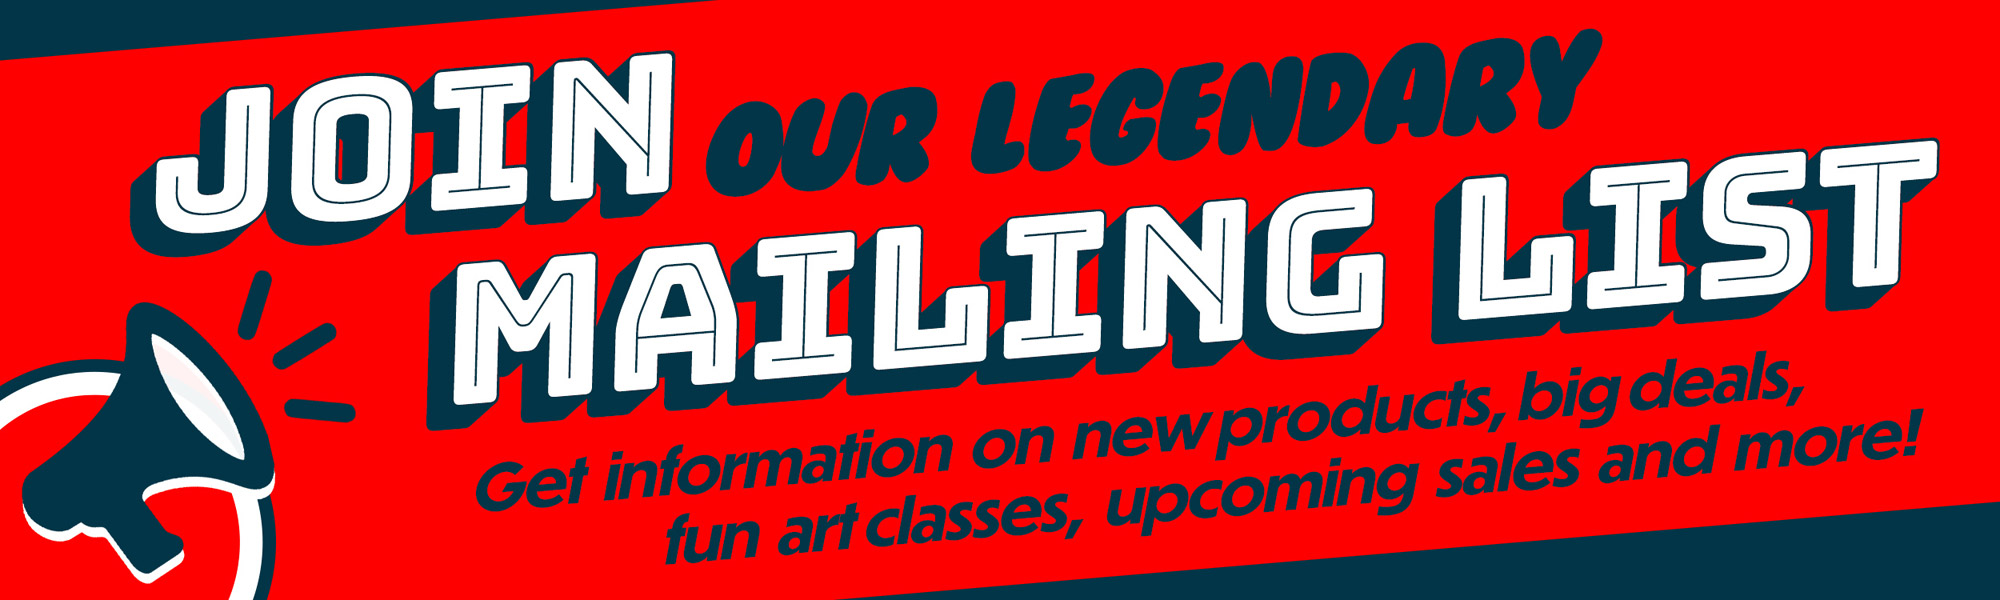 Join Our Legendary Mailing List. Get information on new products, big deals, fun art classes, upcoming sales and more!